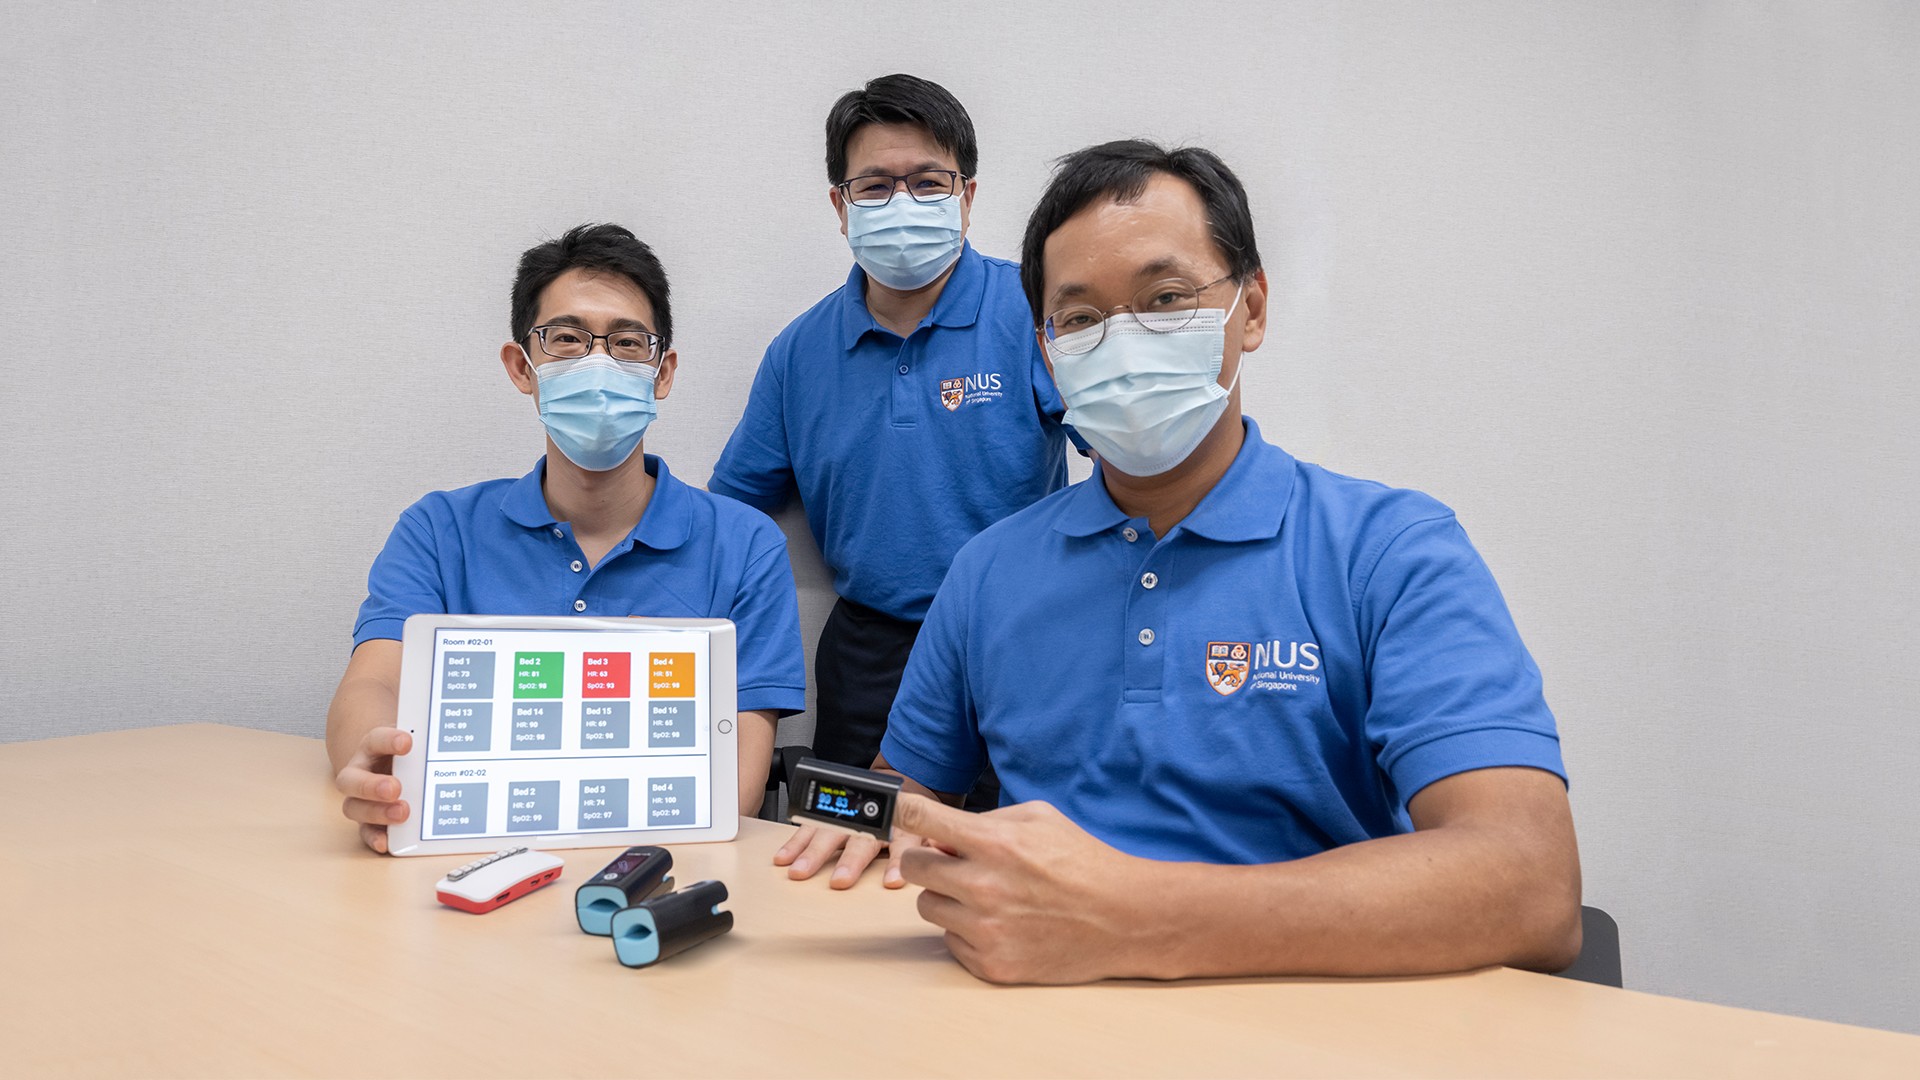 Automated blood oxygen monitoring system to boost COVID-19 fight